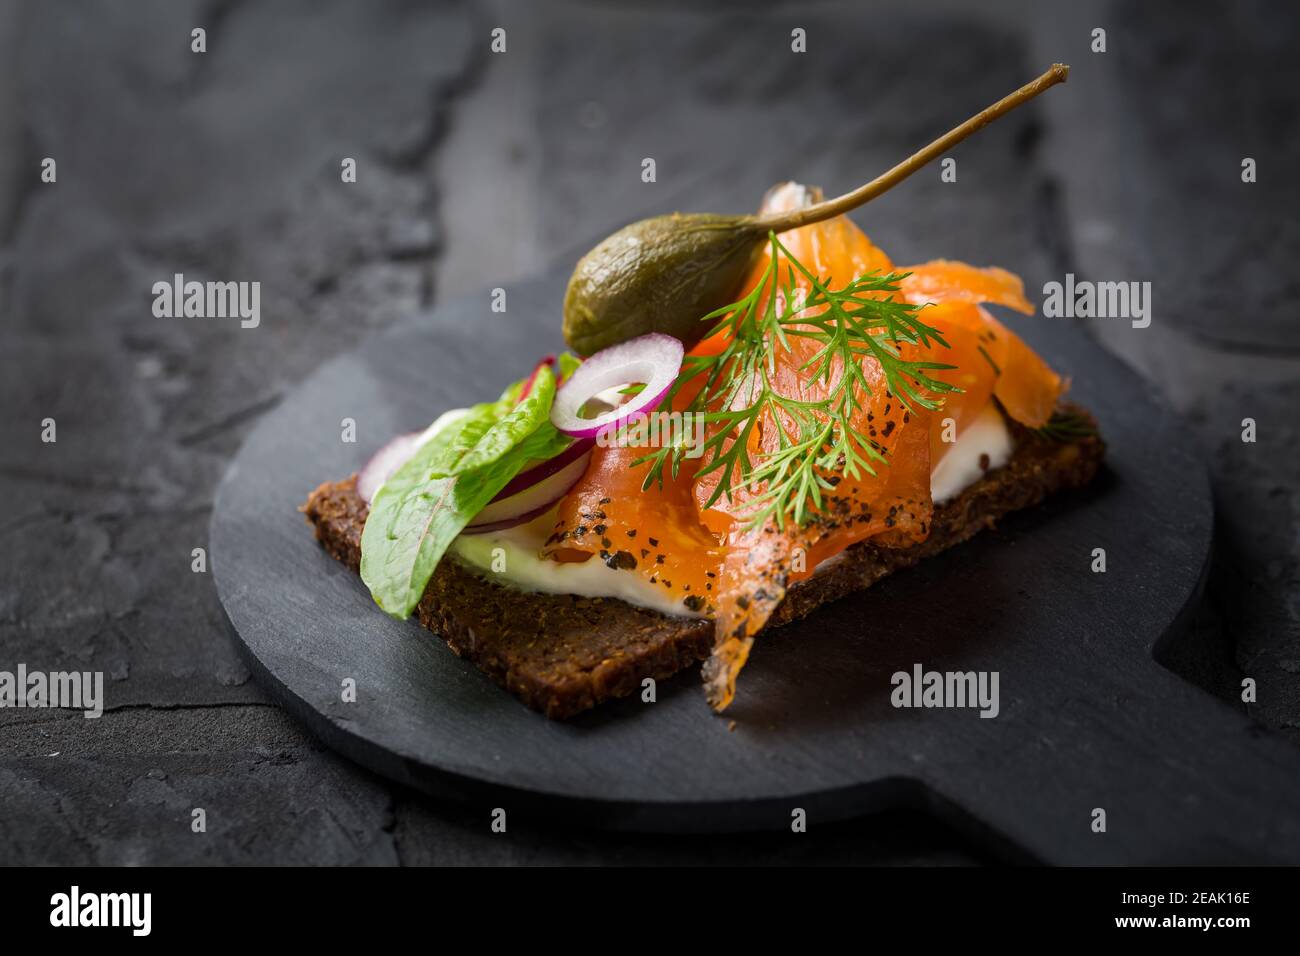 Salmon open sandwich on Pumpernickel bread with vegetables, herbs and soft cheese Stock Photo